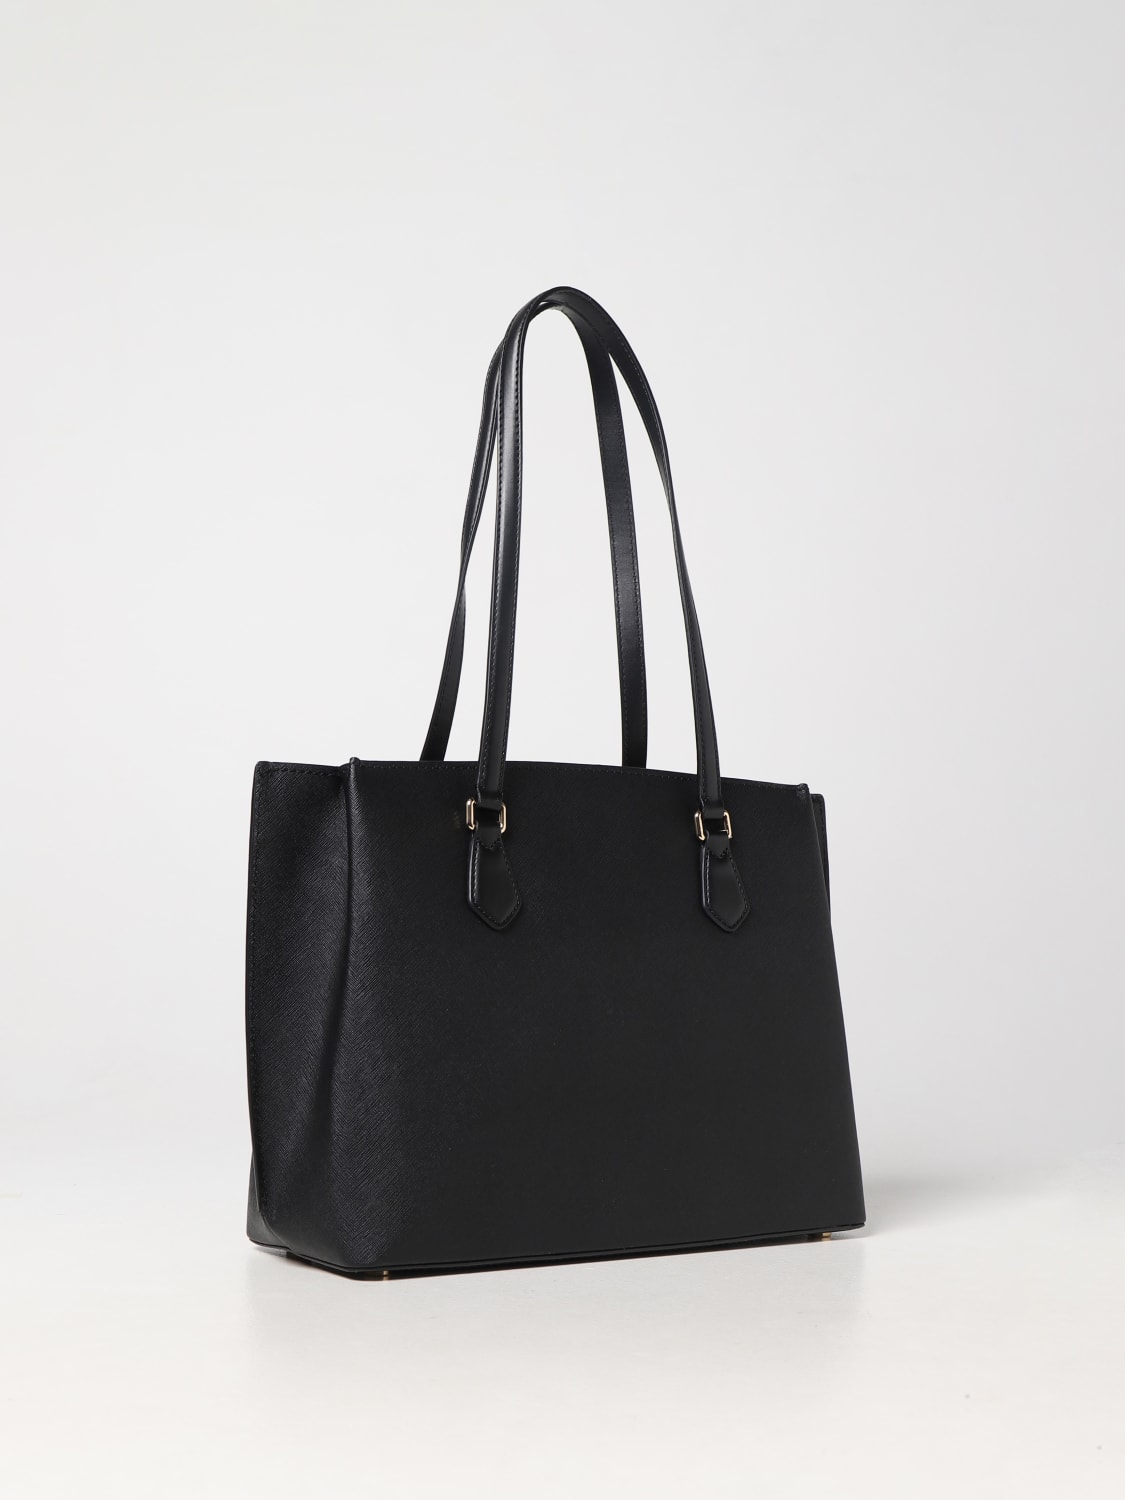 Michael Kors Outlet: Michael Ruby bag in saffiano leather - Black